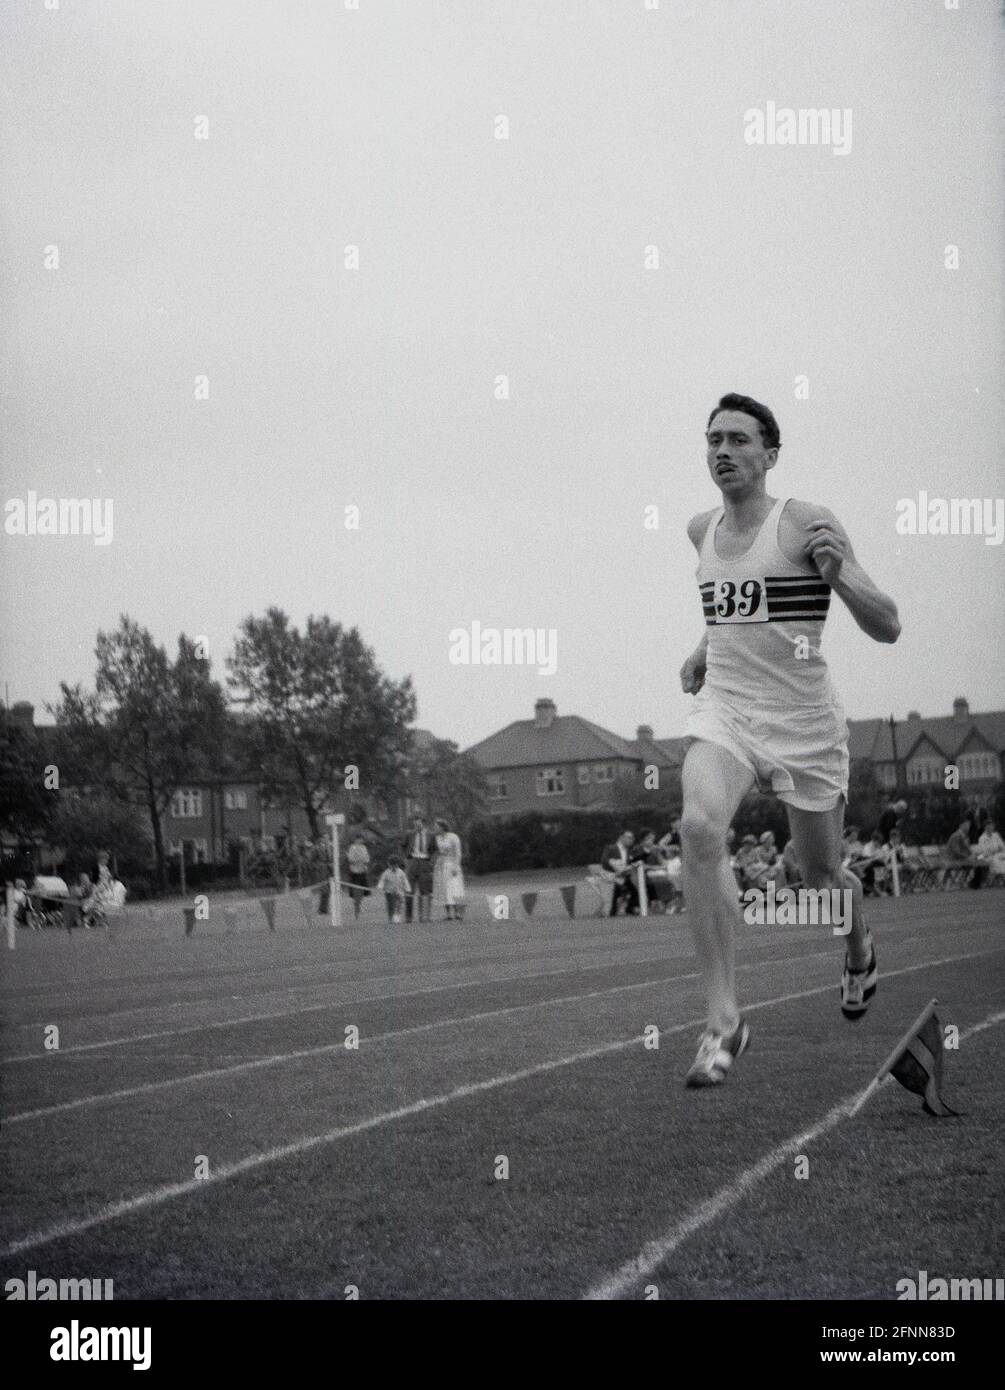 1954, historical, a male competitor outside running on a grass track at a civil service sports day, England, UK, an amateur sports event but competitive nonetheless. Stock Photo